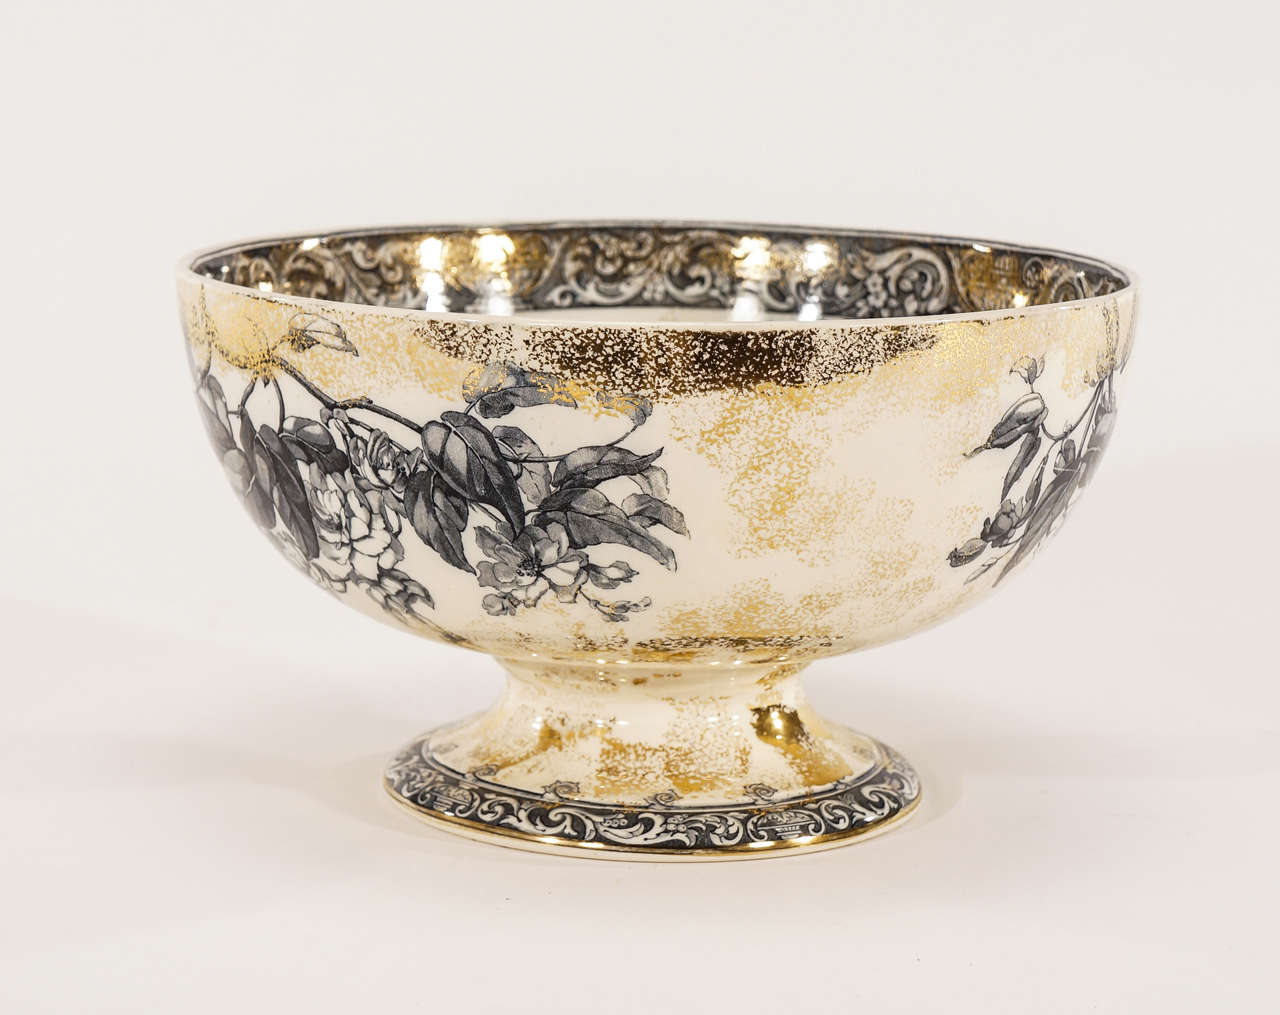 Perfect as a centerpiece, this 19th century Doulton footed punchbowl is beautifully decorated with a botanical motif in a ink blue tone over ivory ground and highlighted with gold enamels. The borders have a neoclassical transfer pattern which